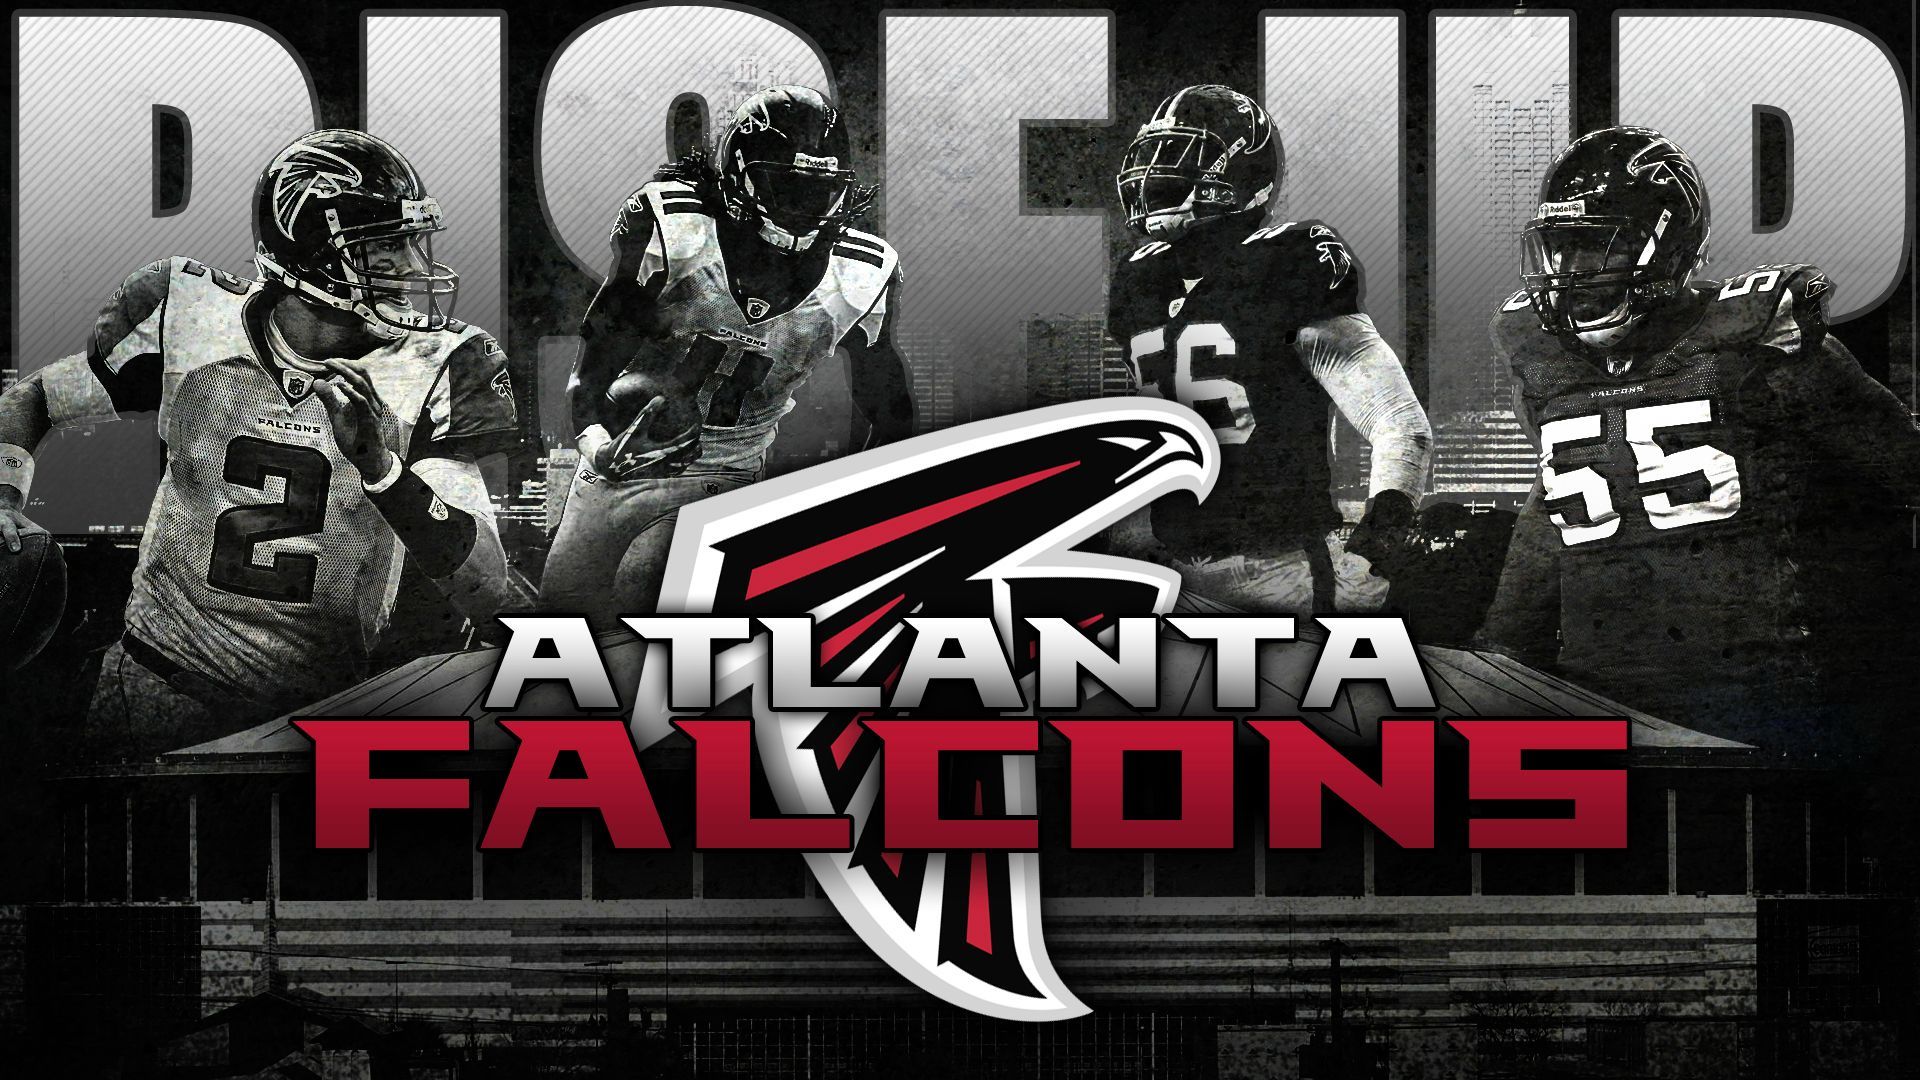 RISE UP FALCONS!! wallpaper i made for the playoffs. Atlanta falcons wallpaper, Falcons rise up, Atlanta falcons rise up